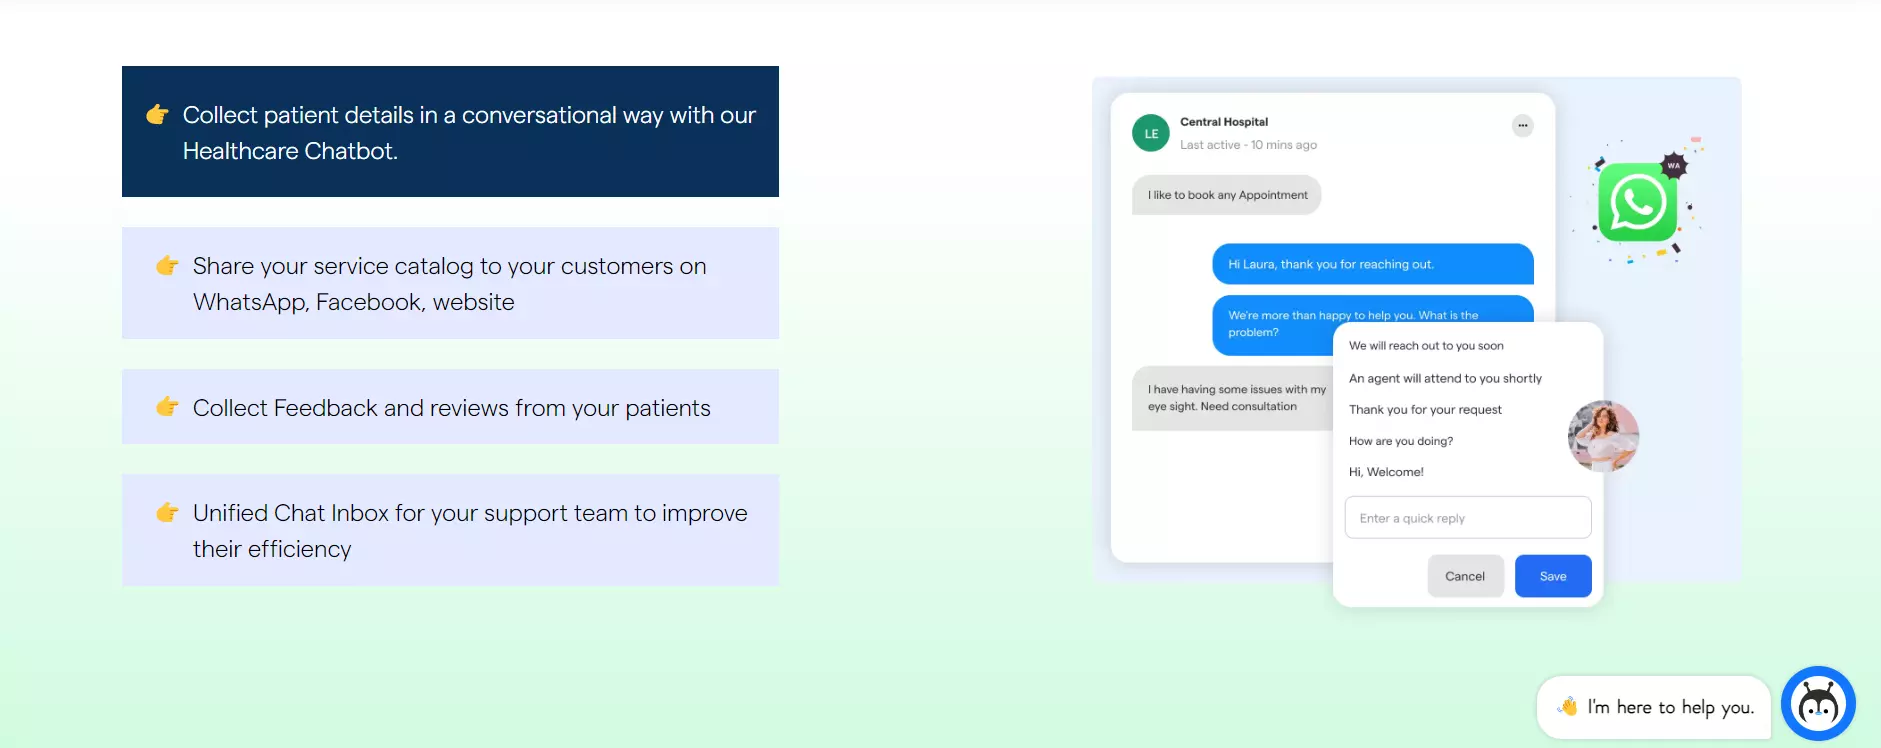 The Trend toward the use of Health-Related Chatbots 